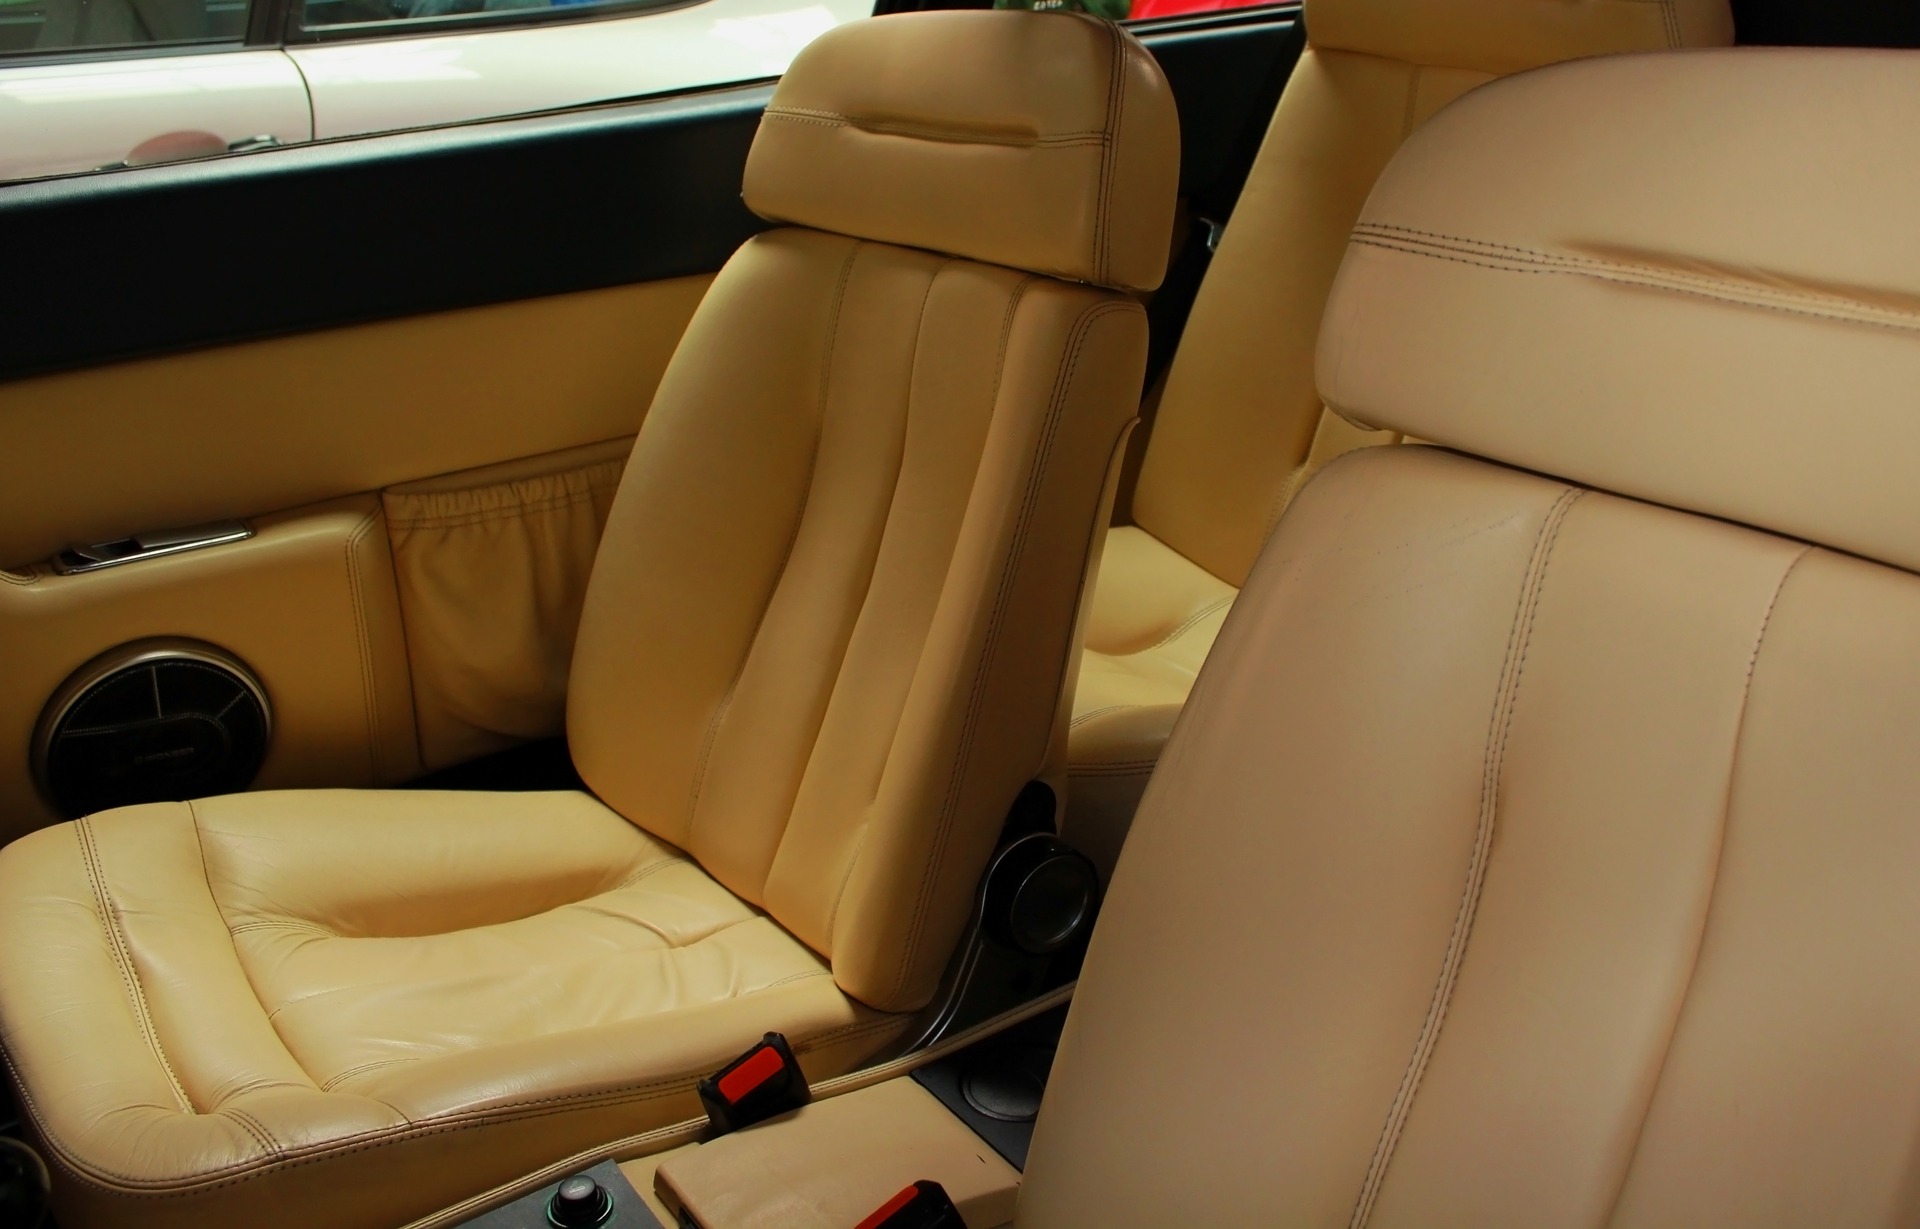 How to clean different types of car upholstery